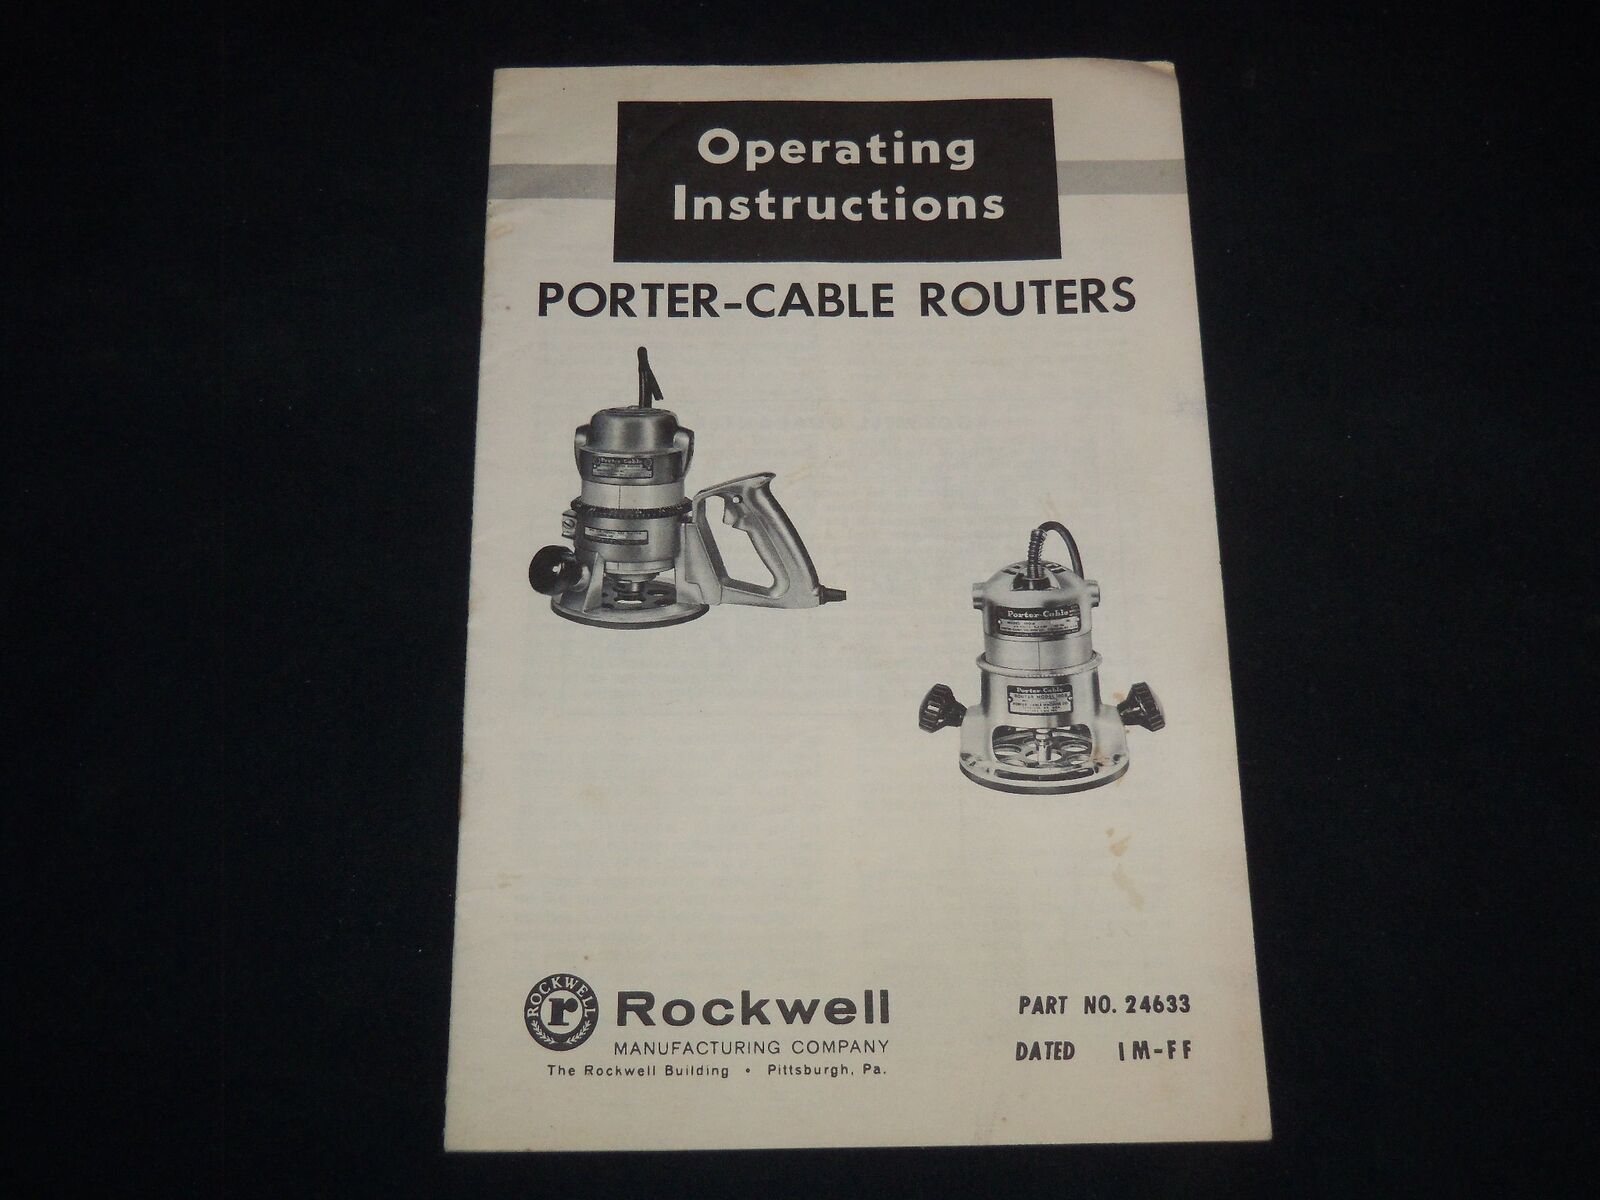 1970'S PORTER CABLE ROUTERS OPERATING INSTRUCTIONS - ROCKWELL MFG. CO. - J 9146